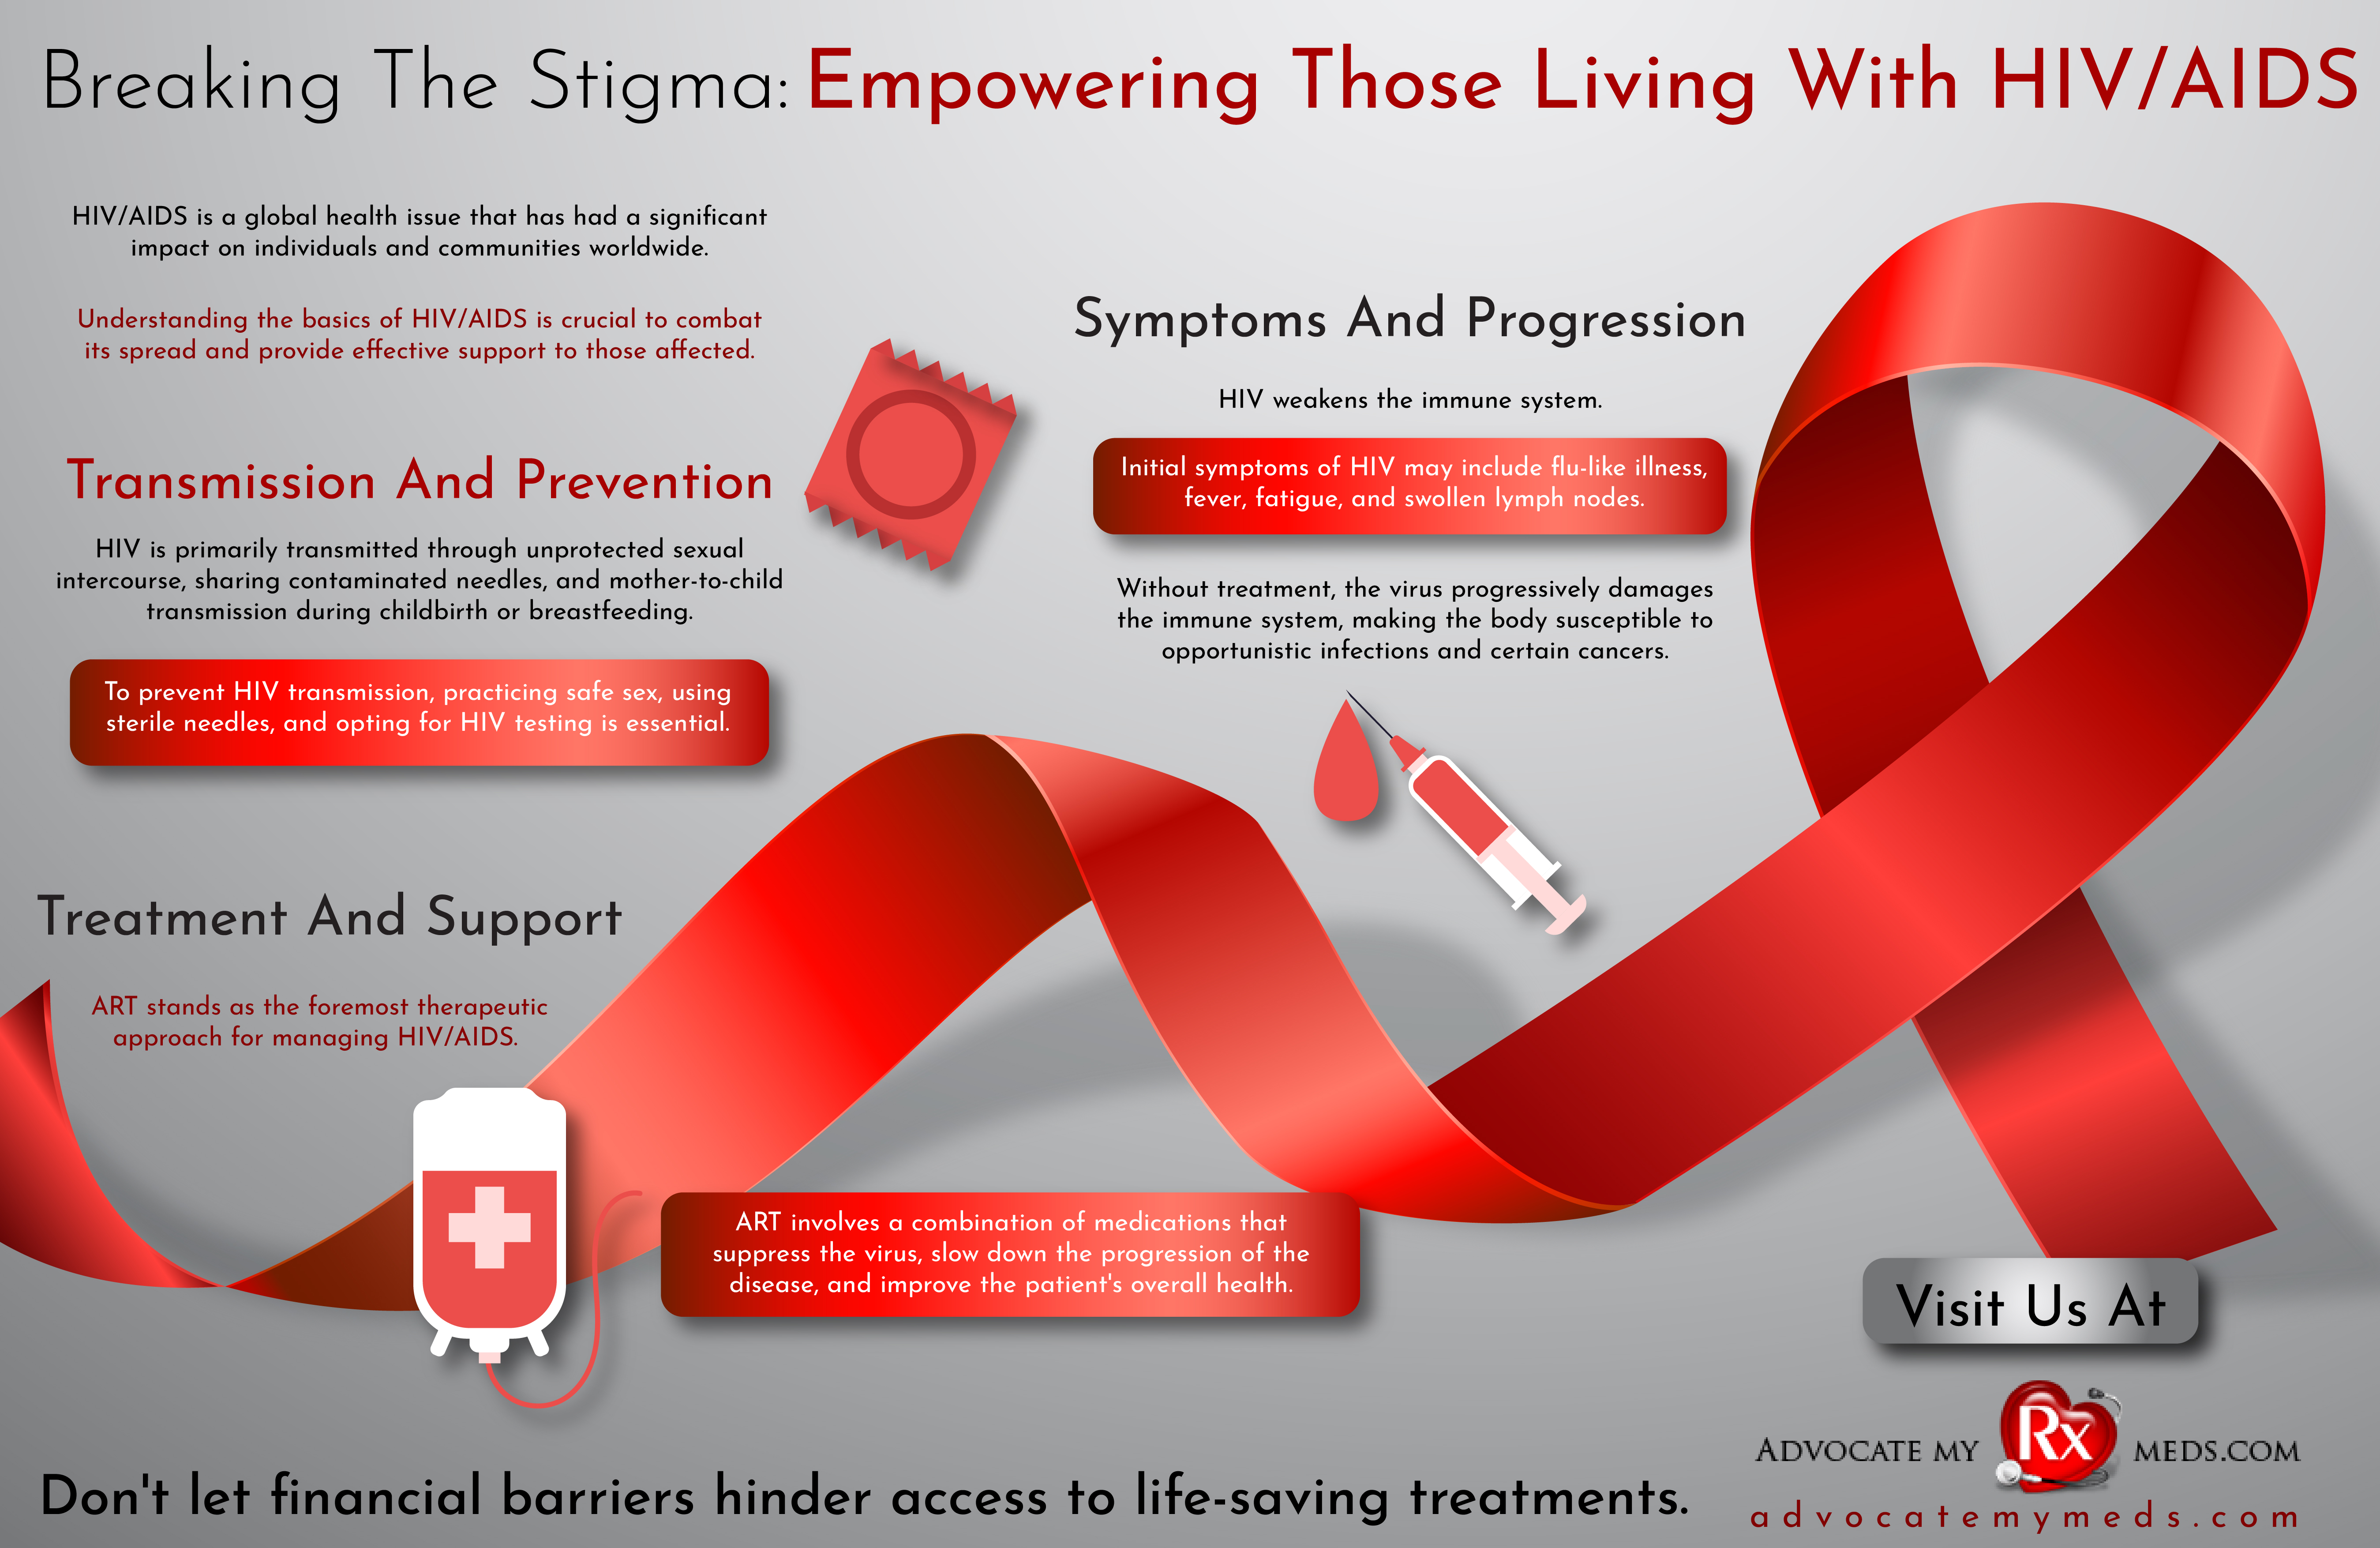 Breaking The Stigma: Empowering Those Living With HIV/AIDS